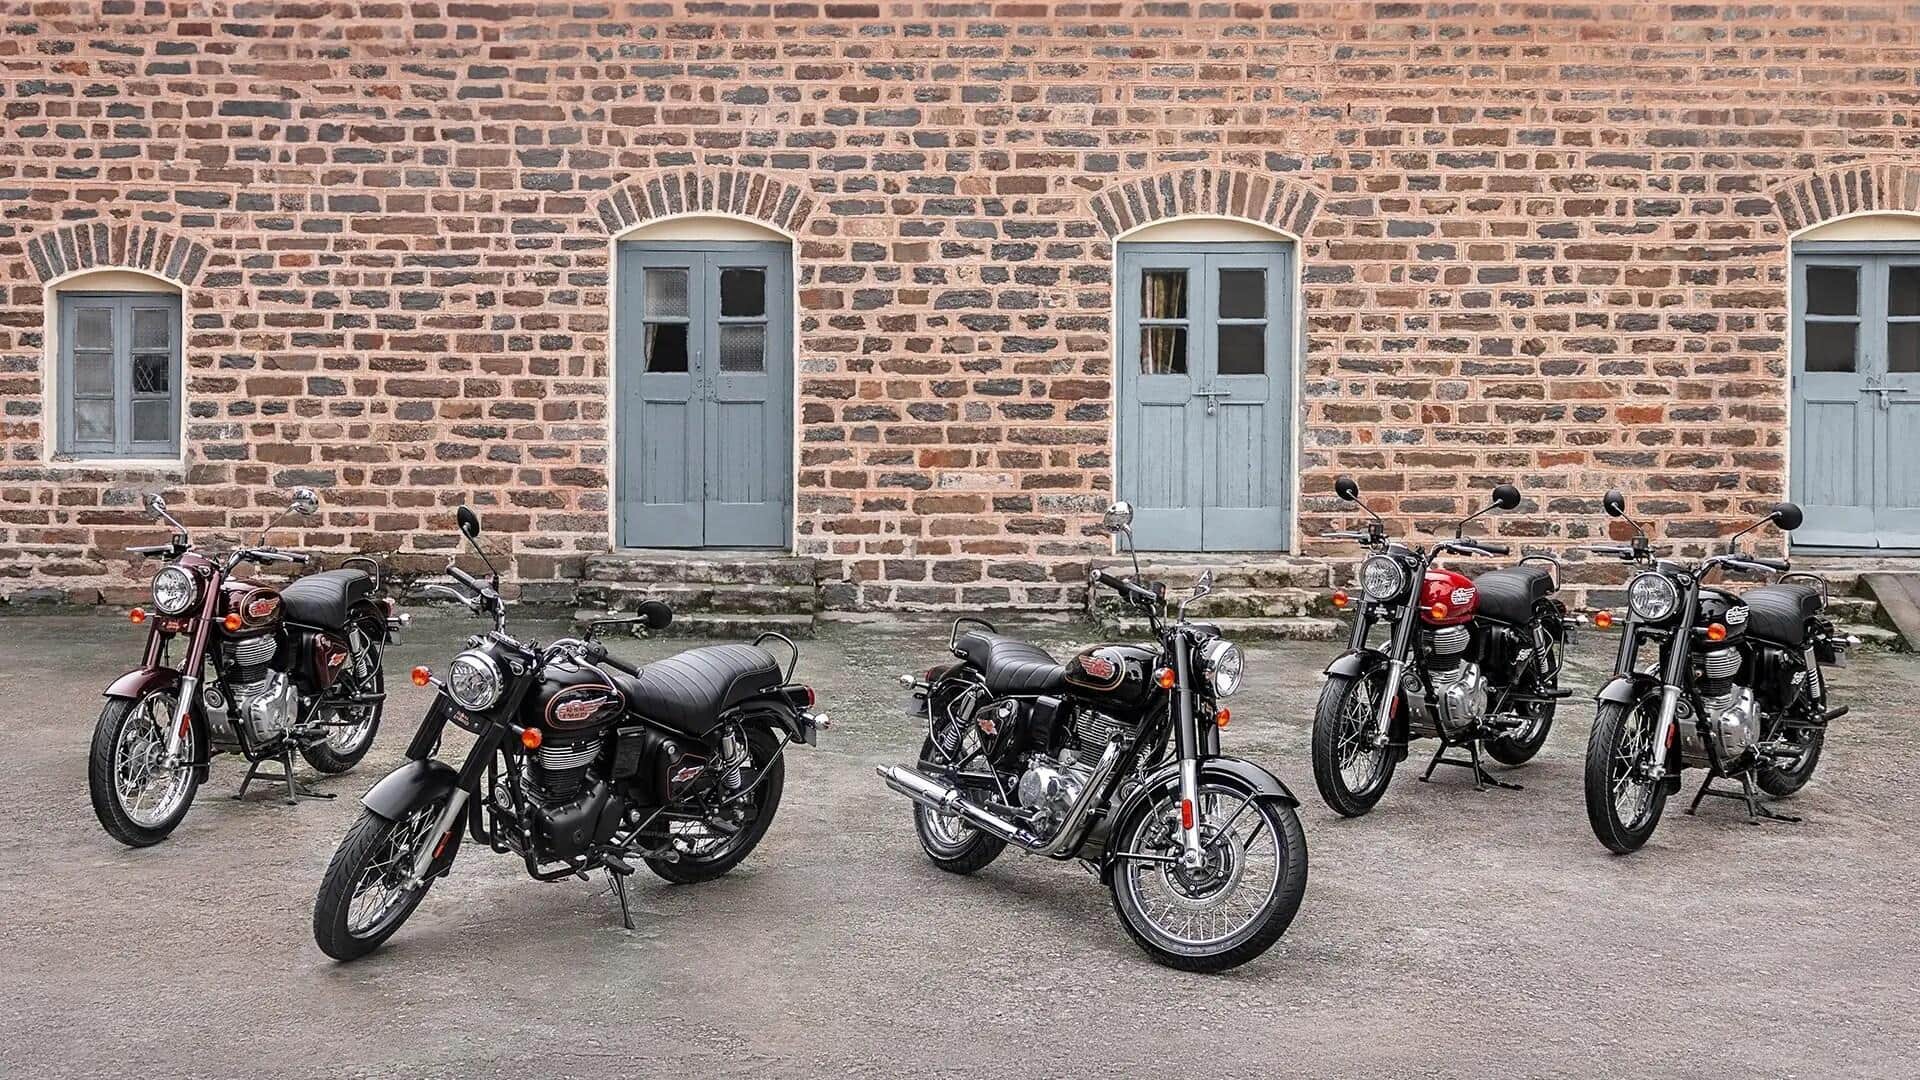 Royal Enfield Bullet 350 or Jawa 350: Which is better